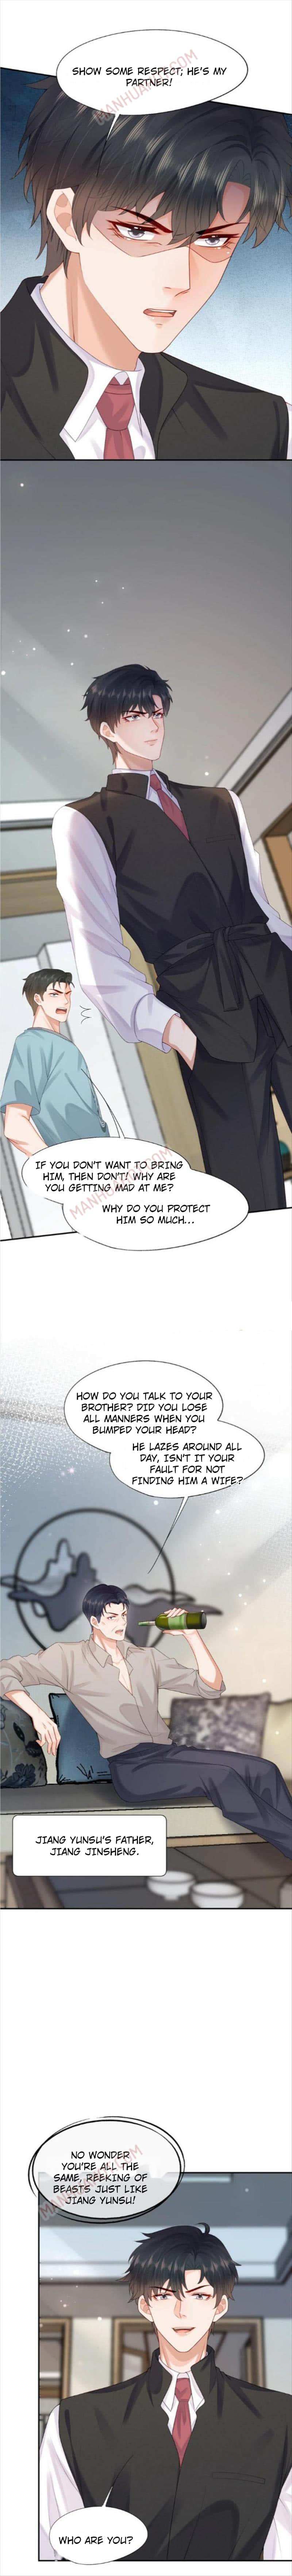 Save My Love - Page 3